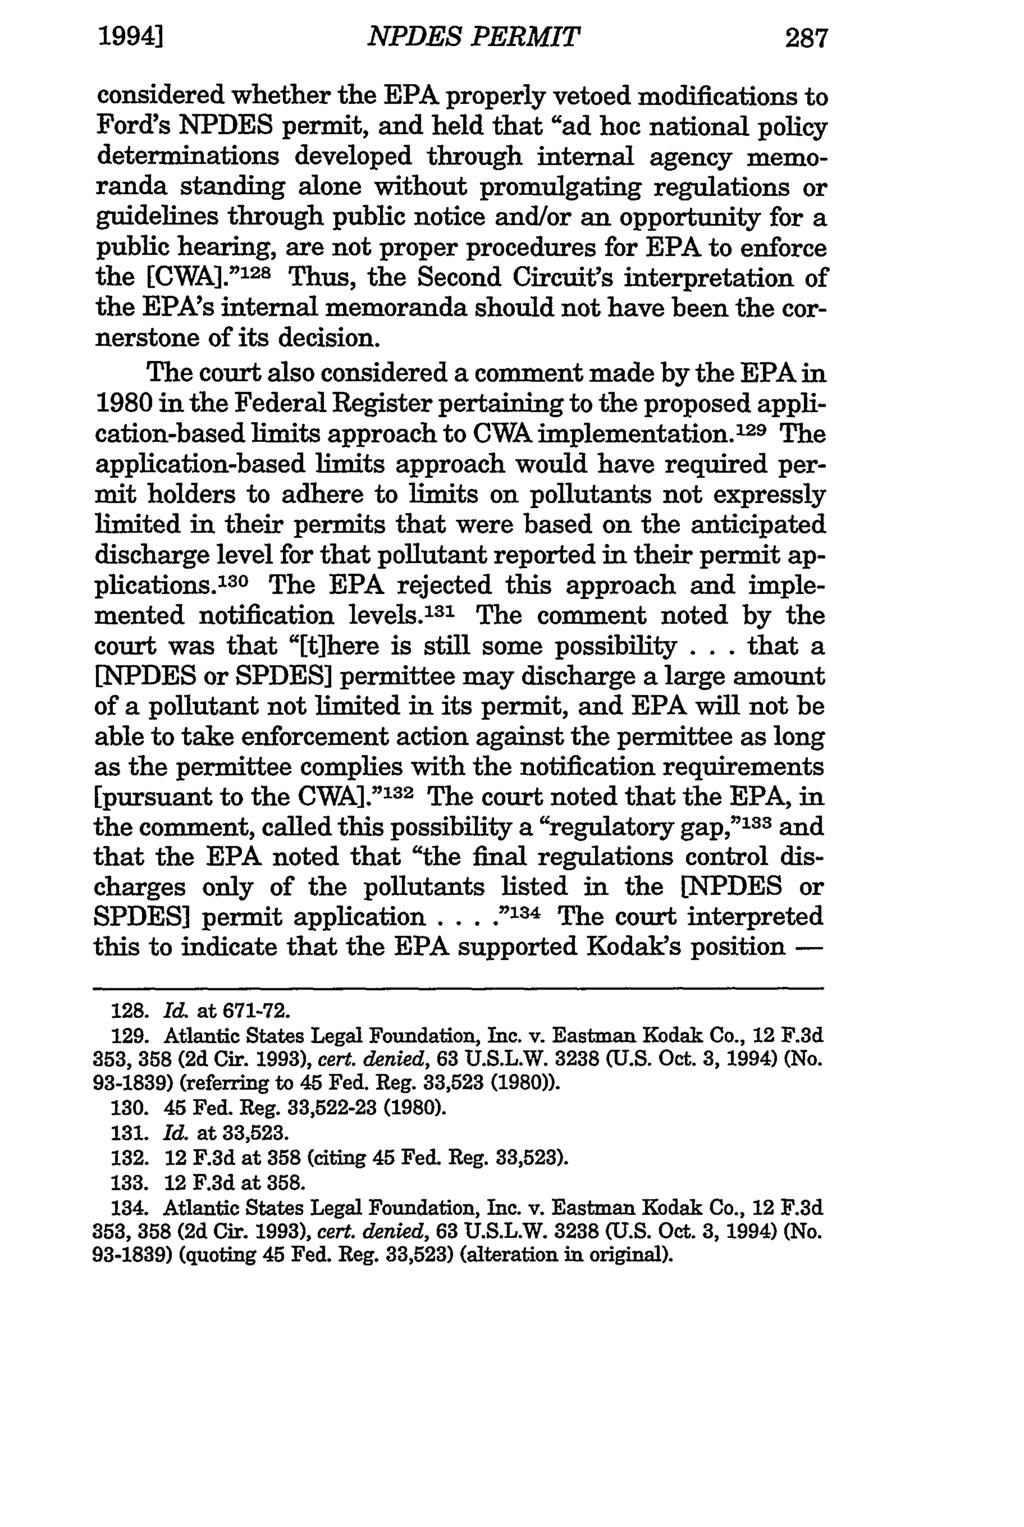 1994] NPDES PERMIT 287 considered whether the EPA properly vetoed modifications to Ford's NPDES permit, and held that "ad hoc national policy determinations developed through internal agency